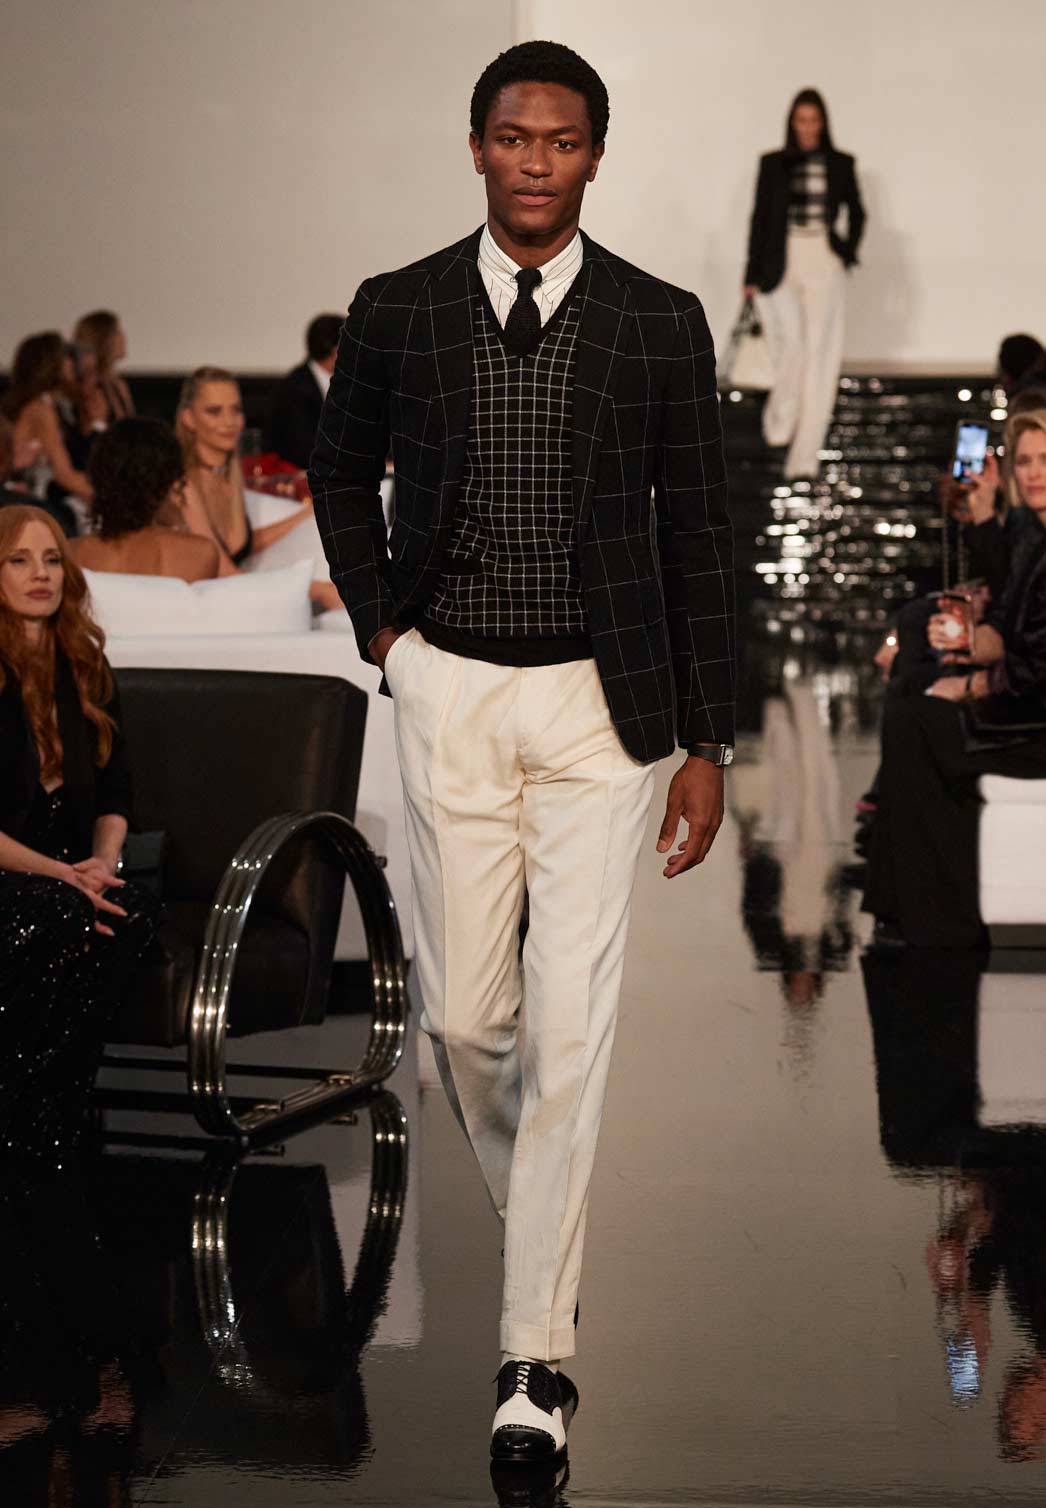 Model wearing look from the Fall/Winter Ralph Lauren Collection show.